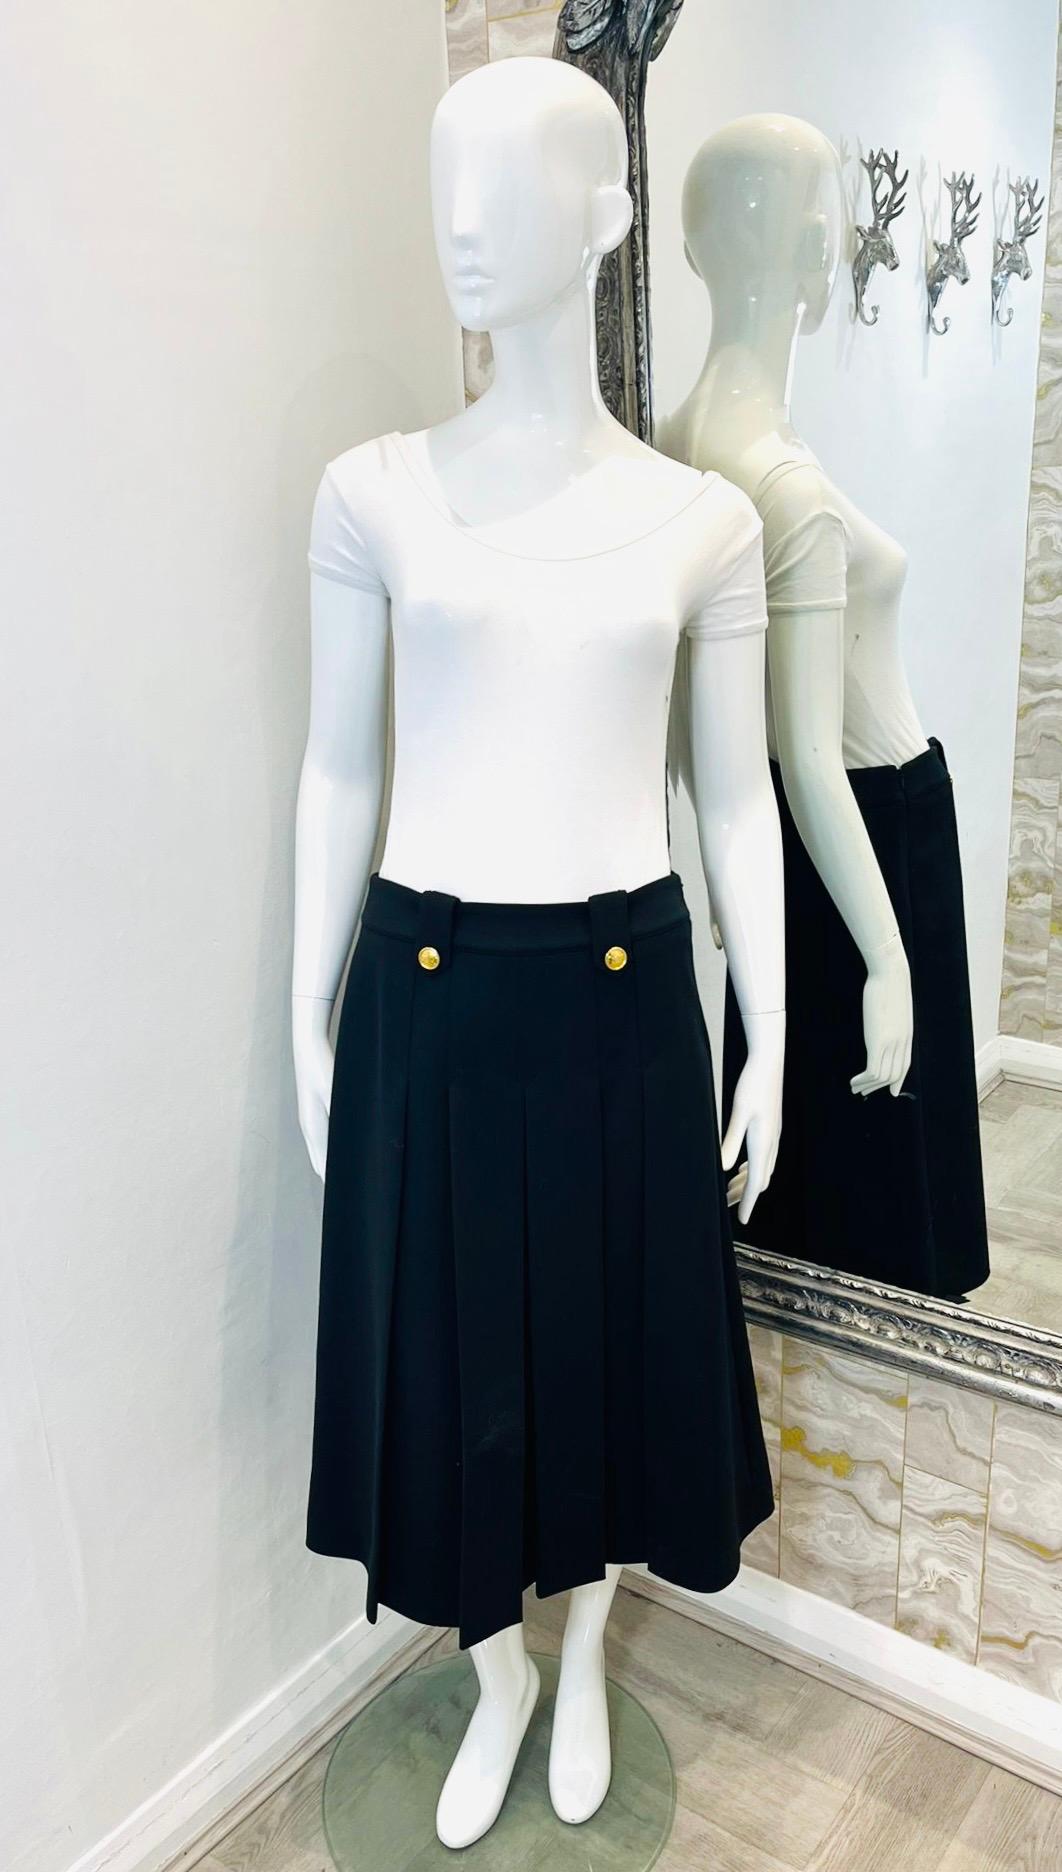 Brand New - Mulberry Virgin Wool Blend Pleated Skirt

Black, midi skirt designed with pleat detailing.

Styled with gold decorative button accent to the front belt loops.

Featuring A-Line silhouette and concealed zip fastening to rear.

Size –